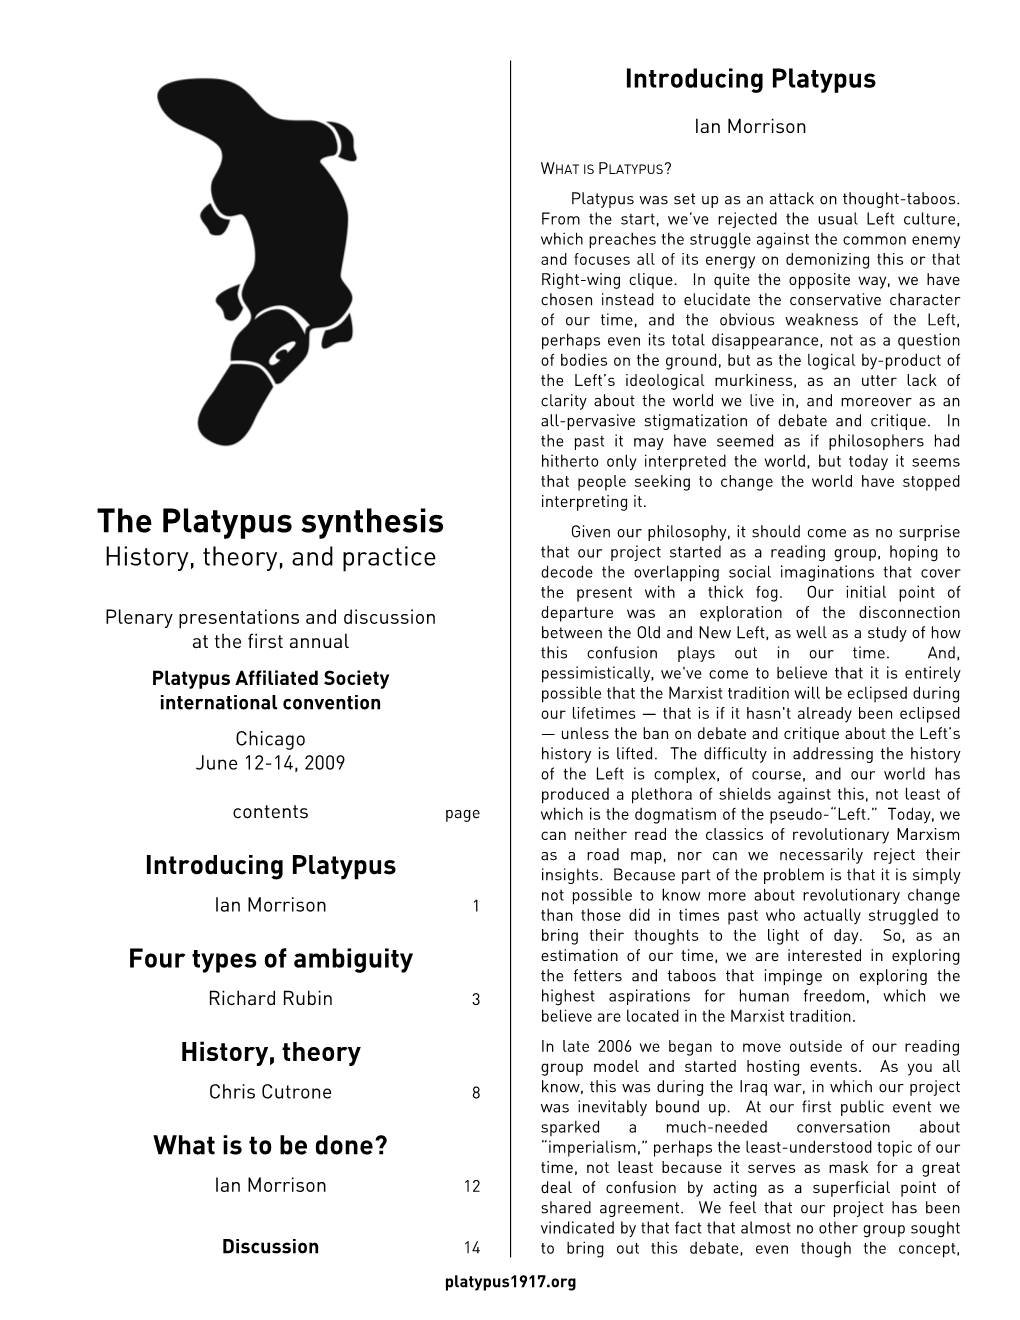 The Platypus Synthesis